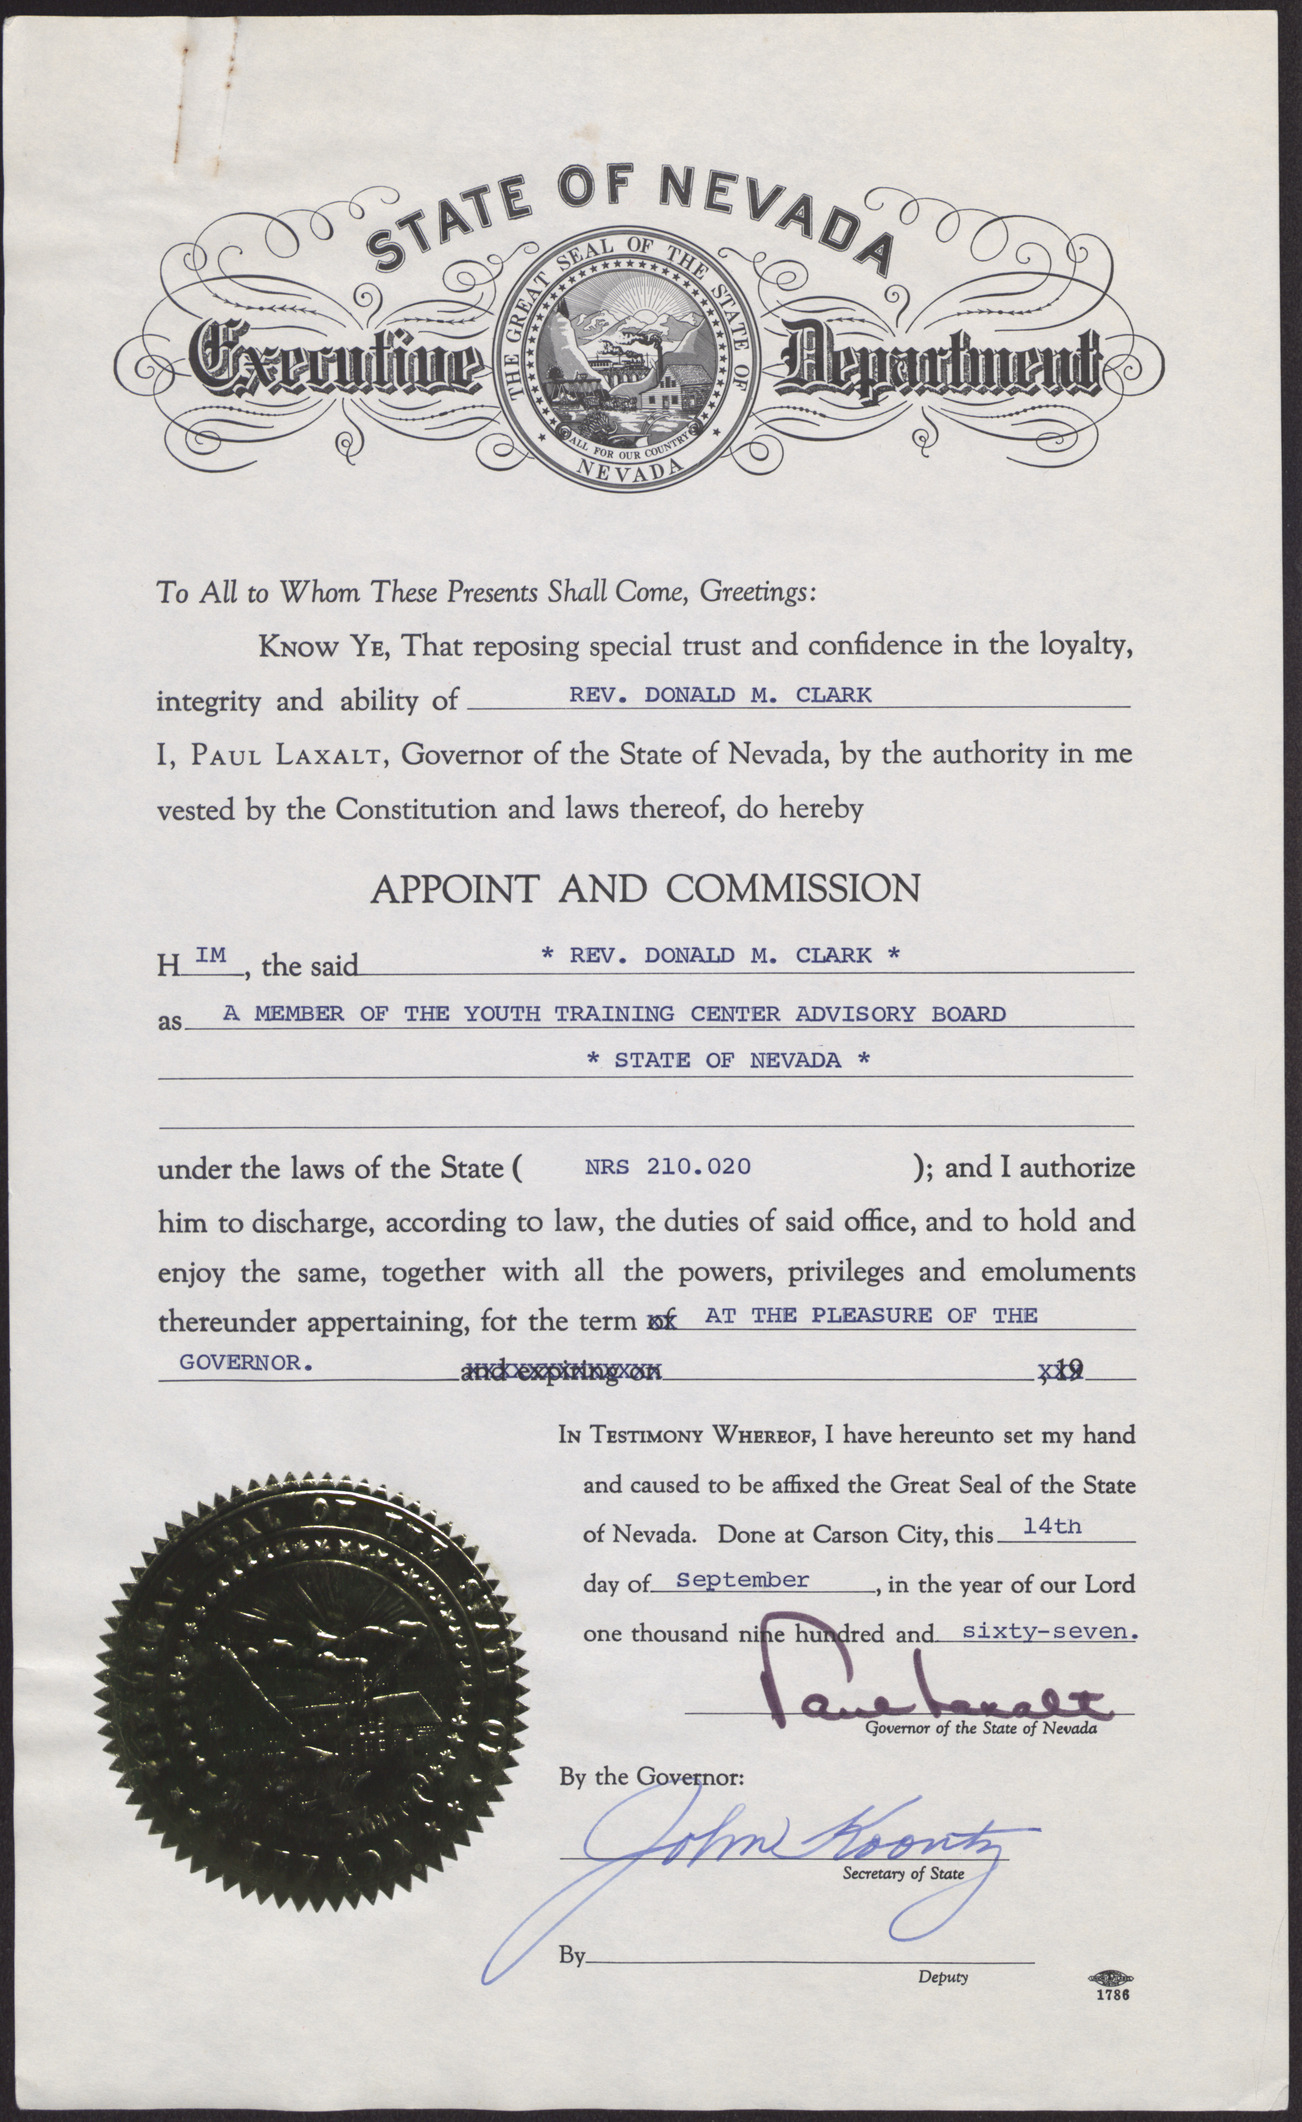 Certificate of appointment and commission for Rev. Donald M. Clark, September 14, 1967